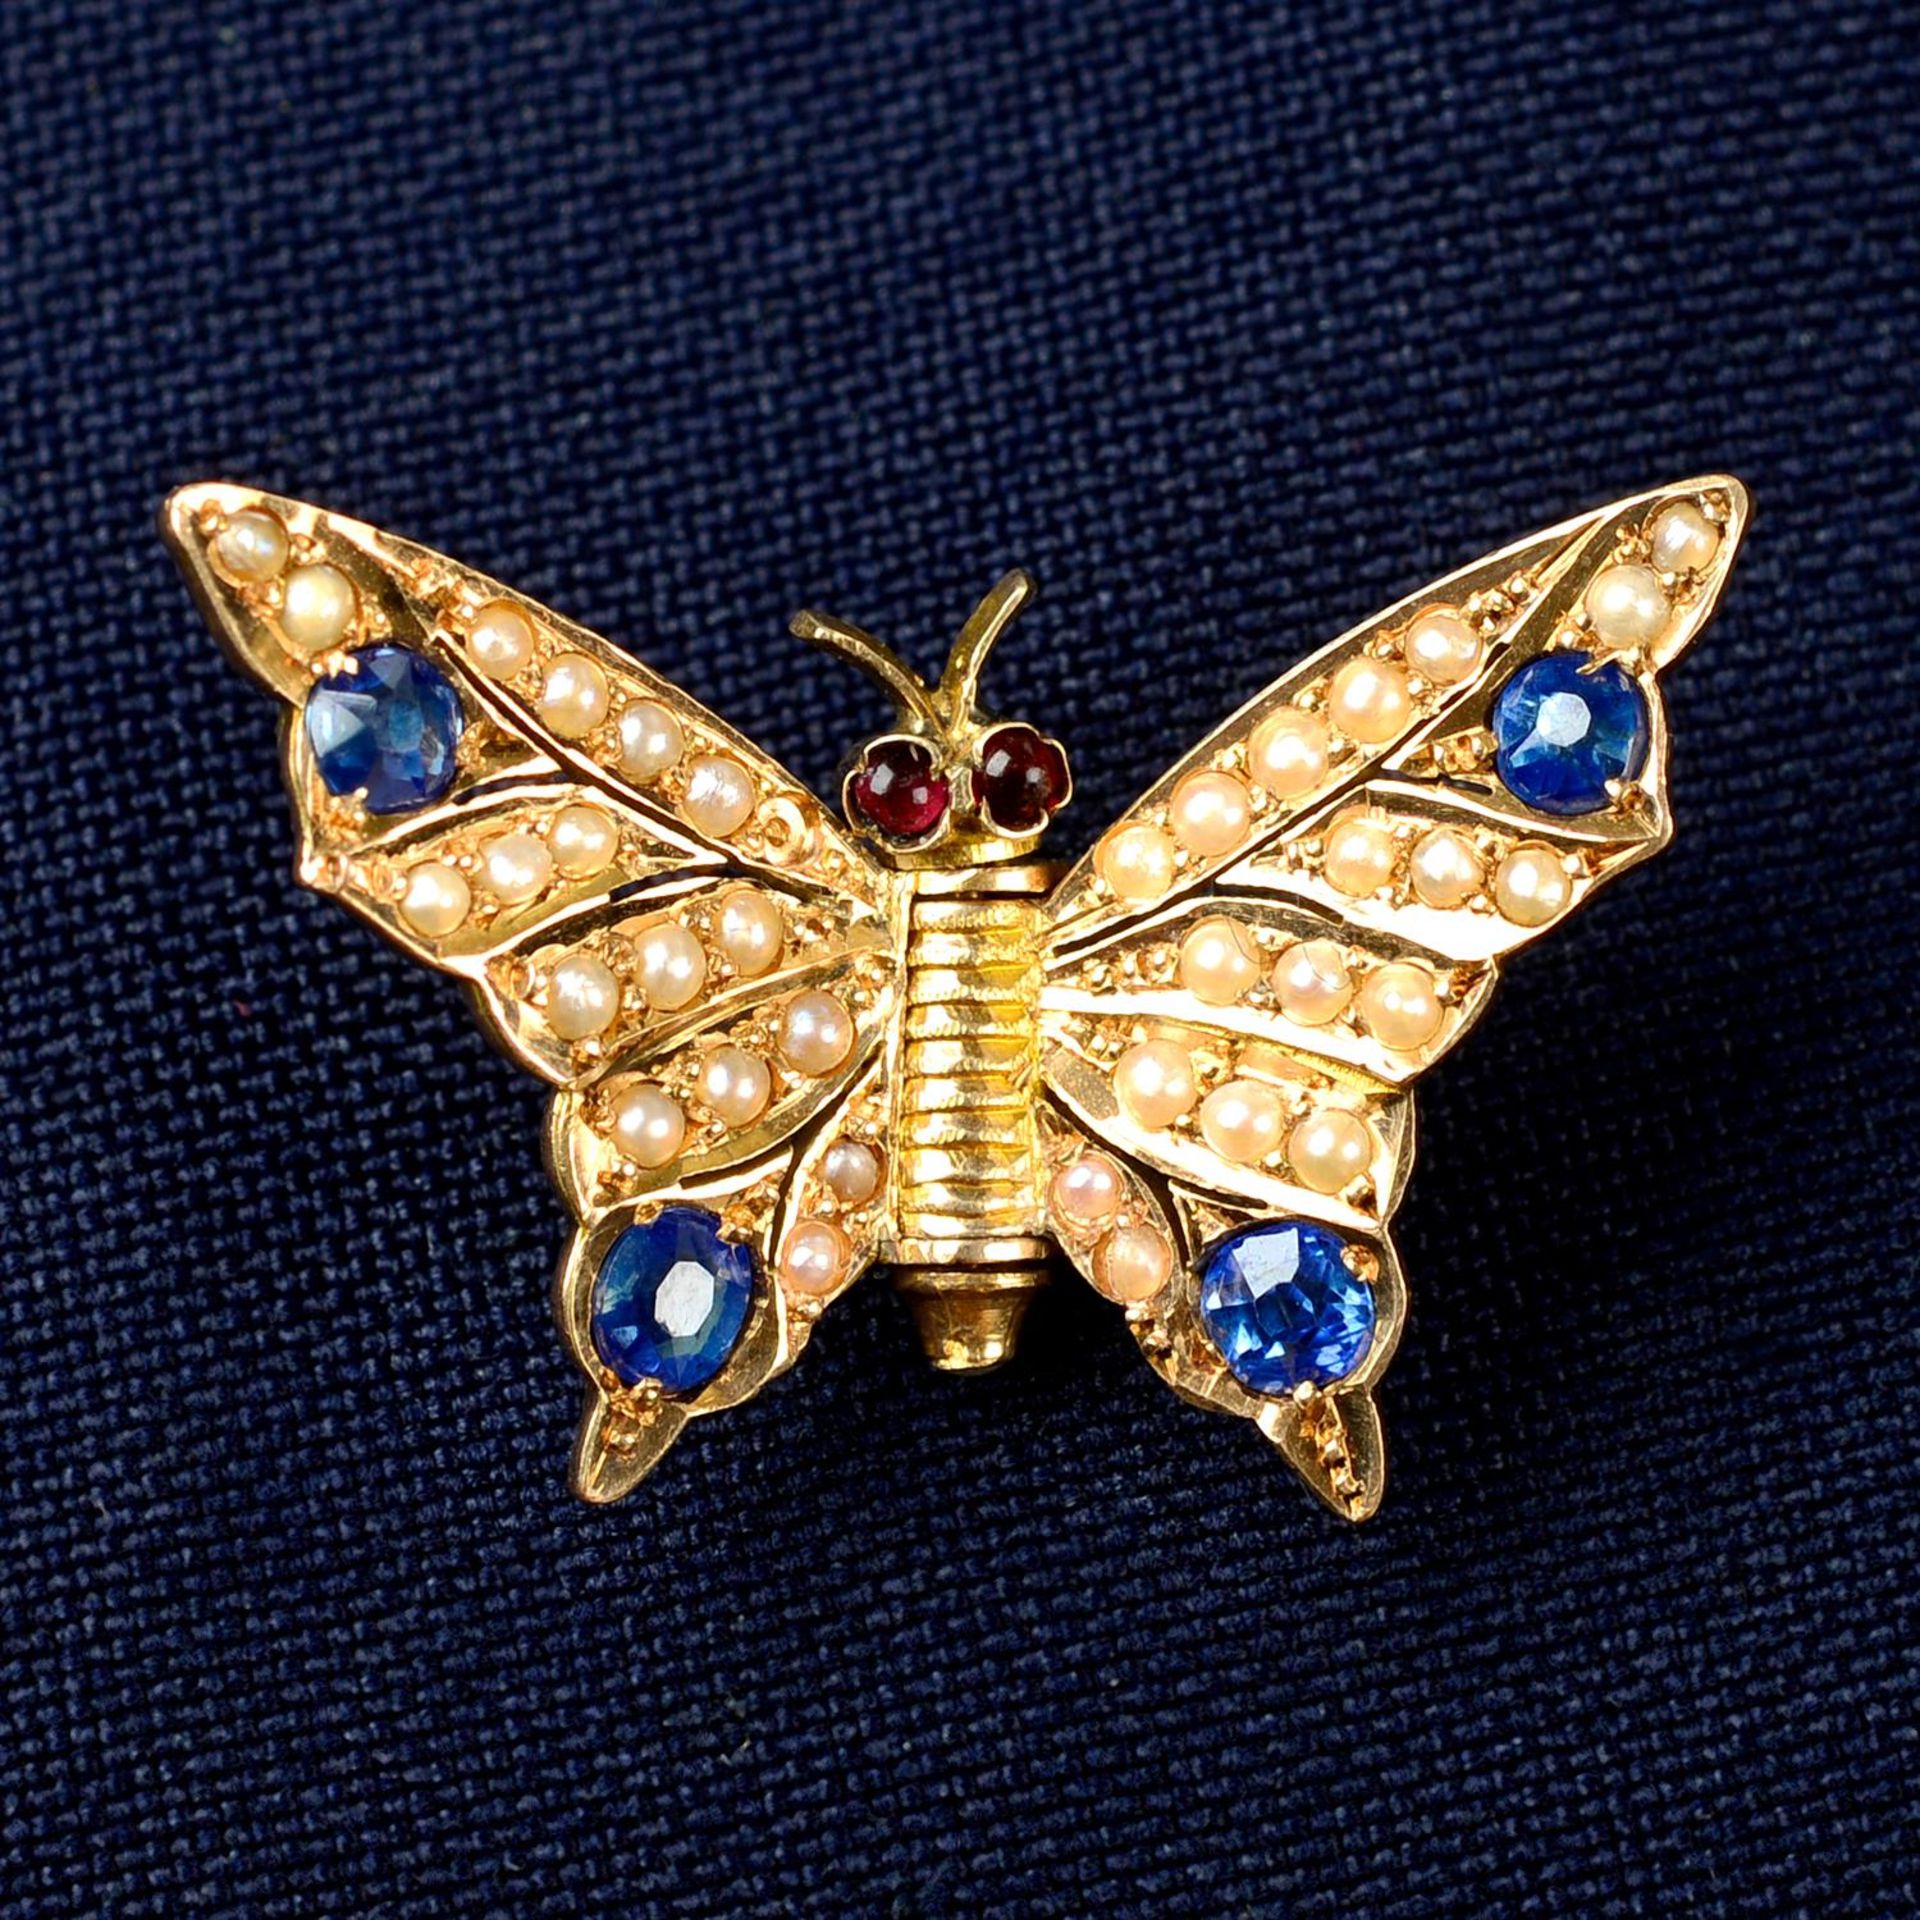 A mid 20th century gold split pearl, sapphire and garnet butterfly clip, by René Boivin.